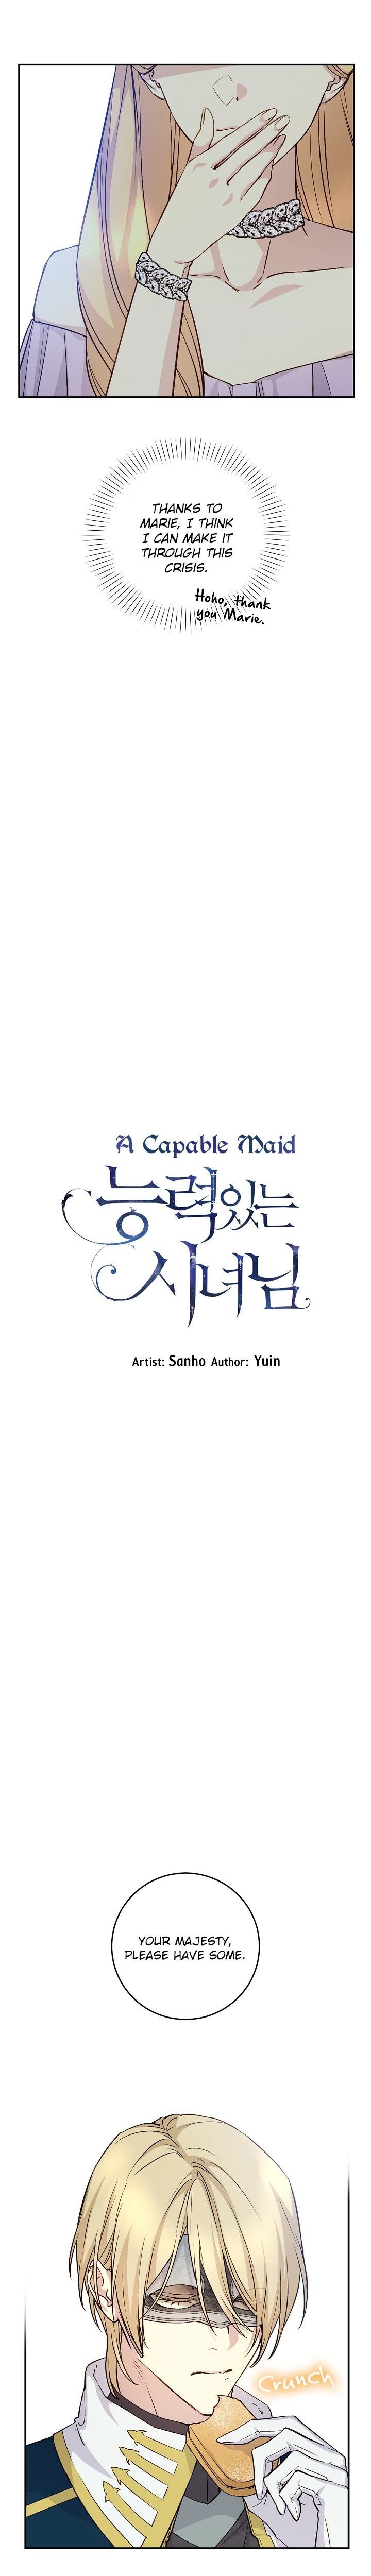 a-capable-maid-chap-41-4